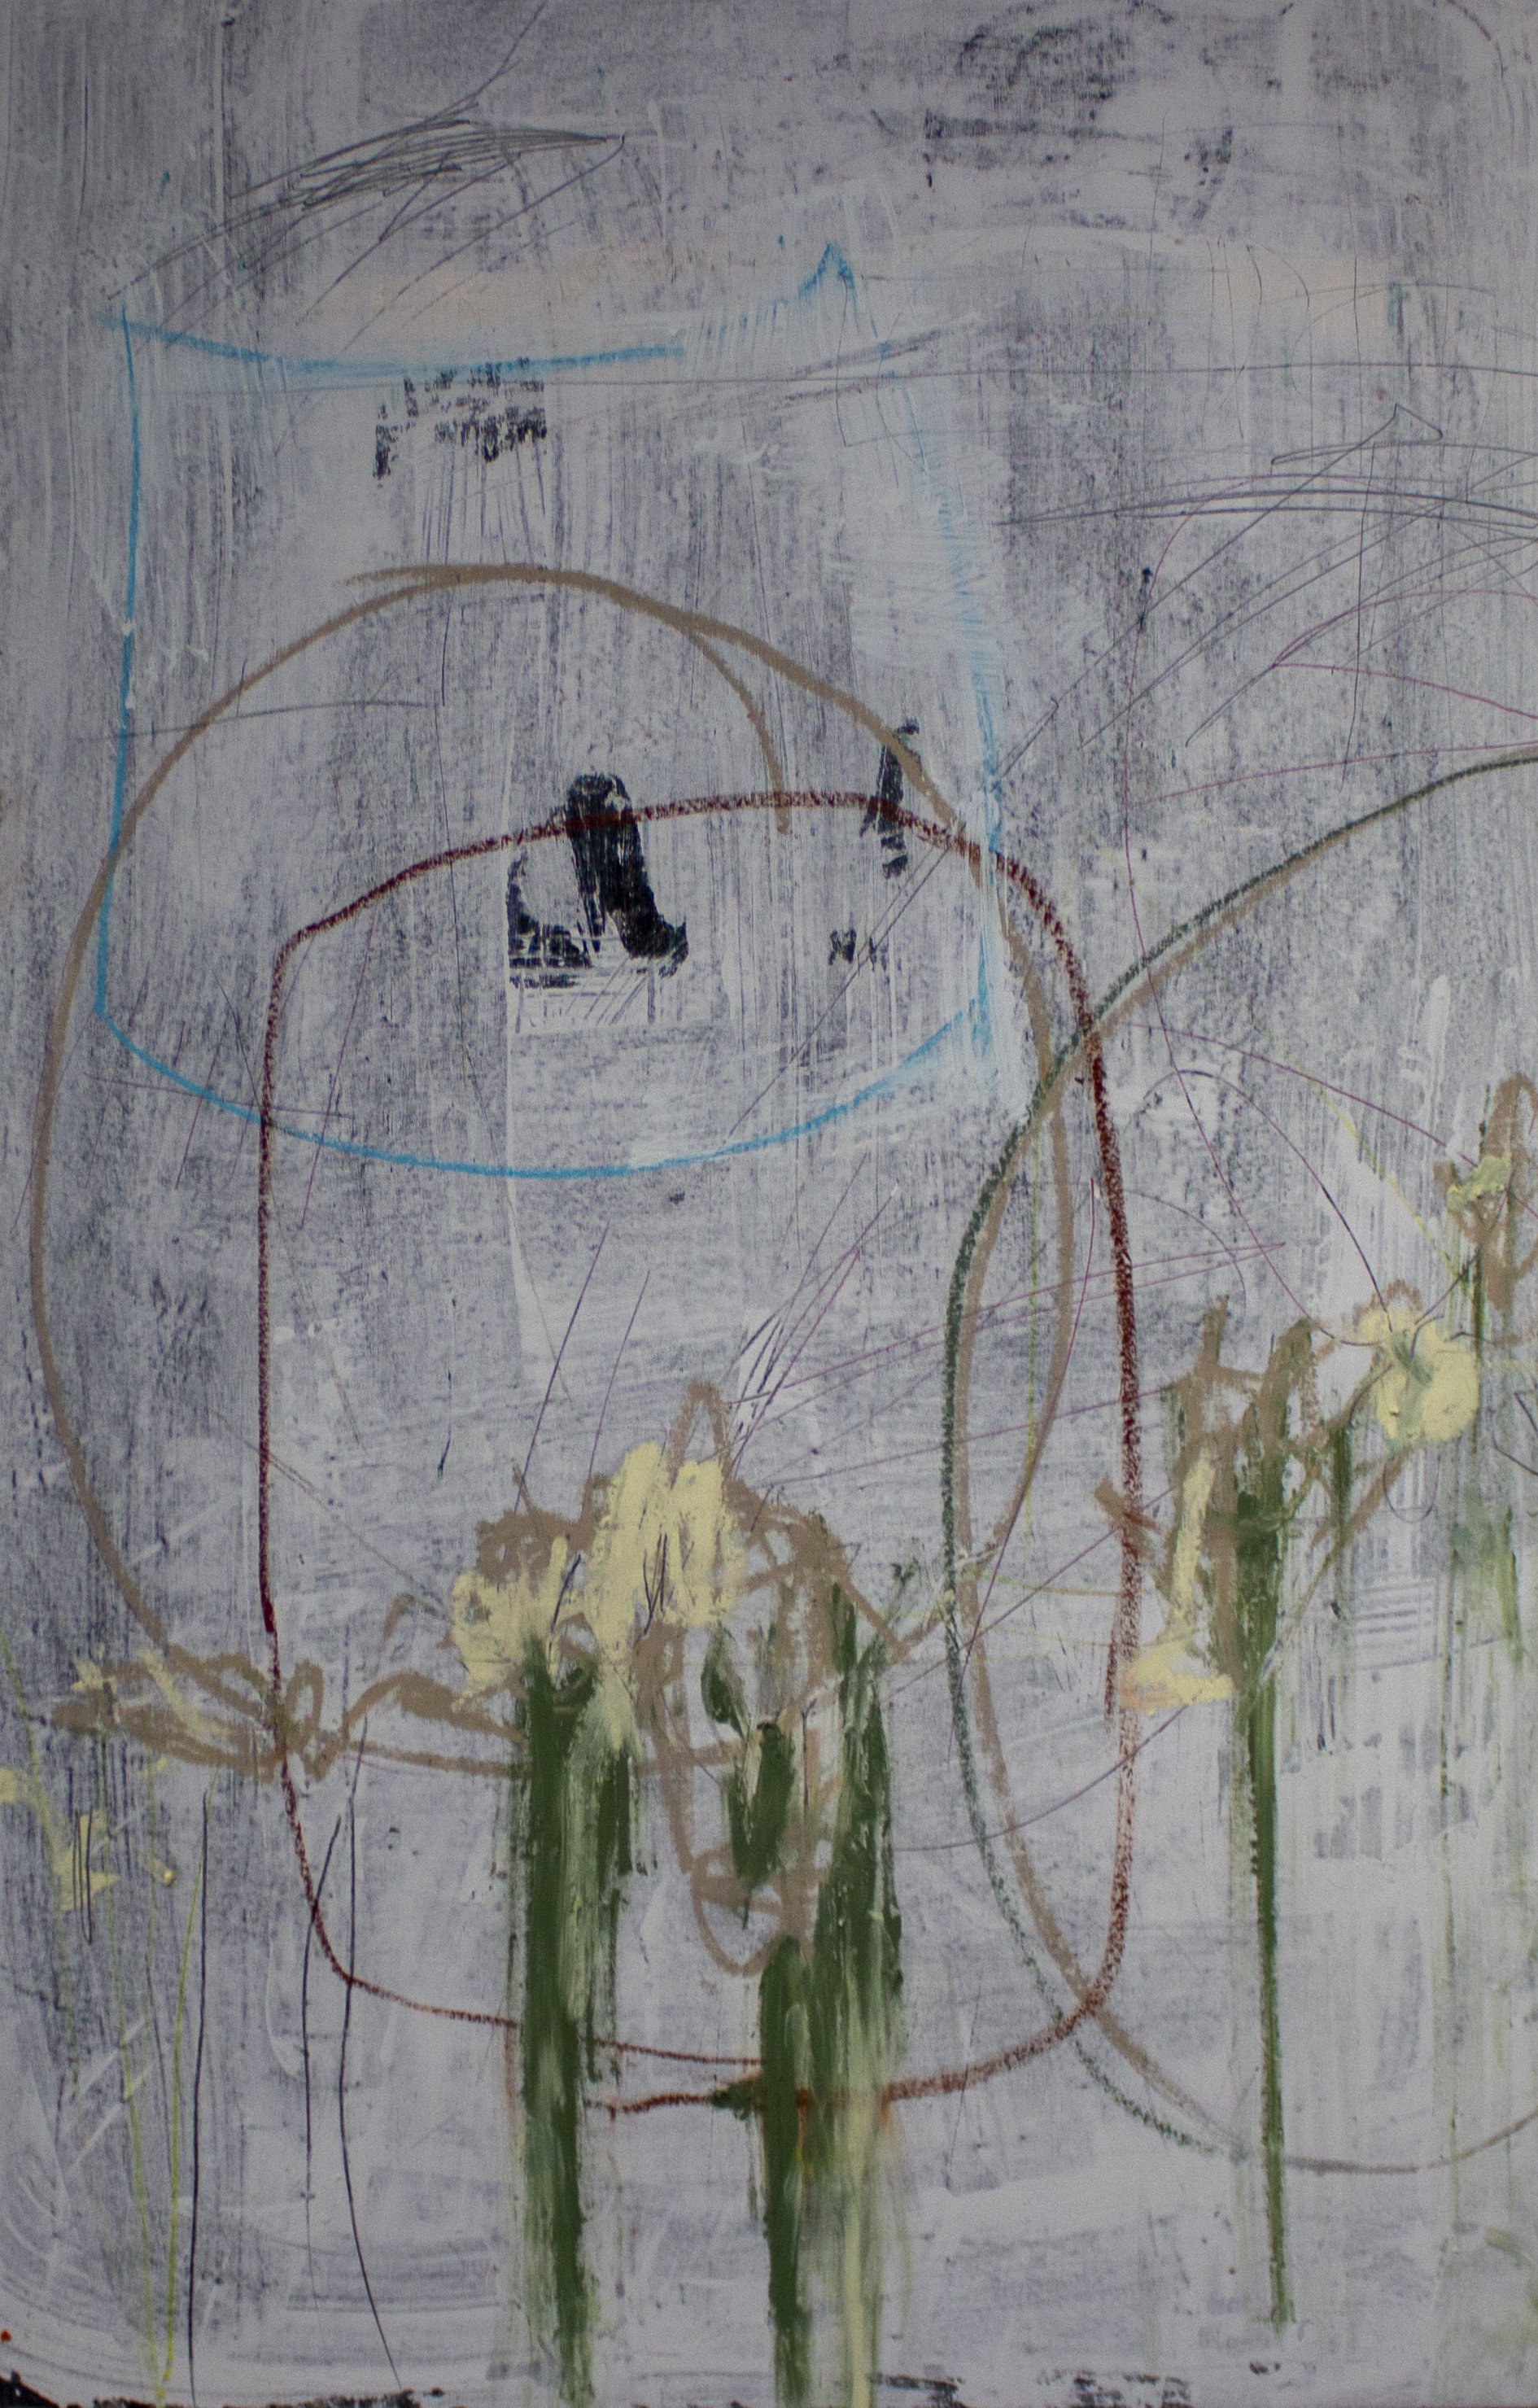   Kensington Trash,  2022.  40 x 62 Inches  Oil, Acrylic, Pastel, Graphite, and Chalk on Canvas 